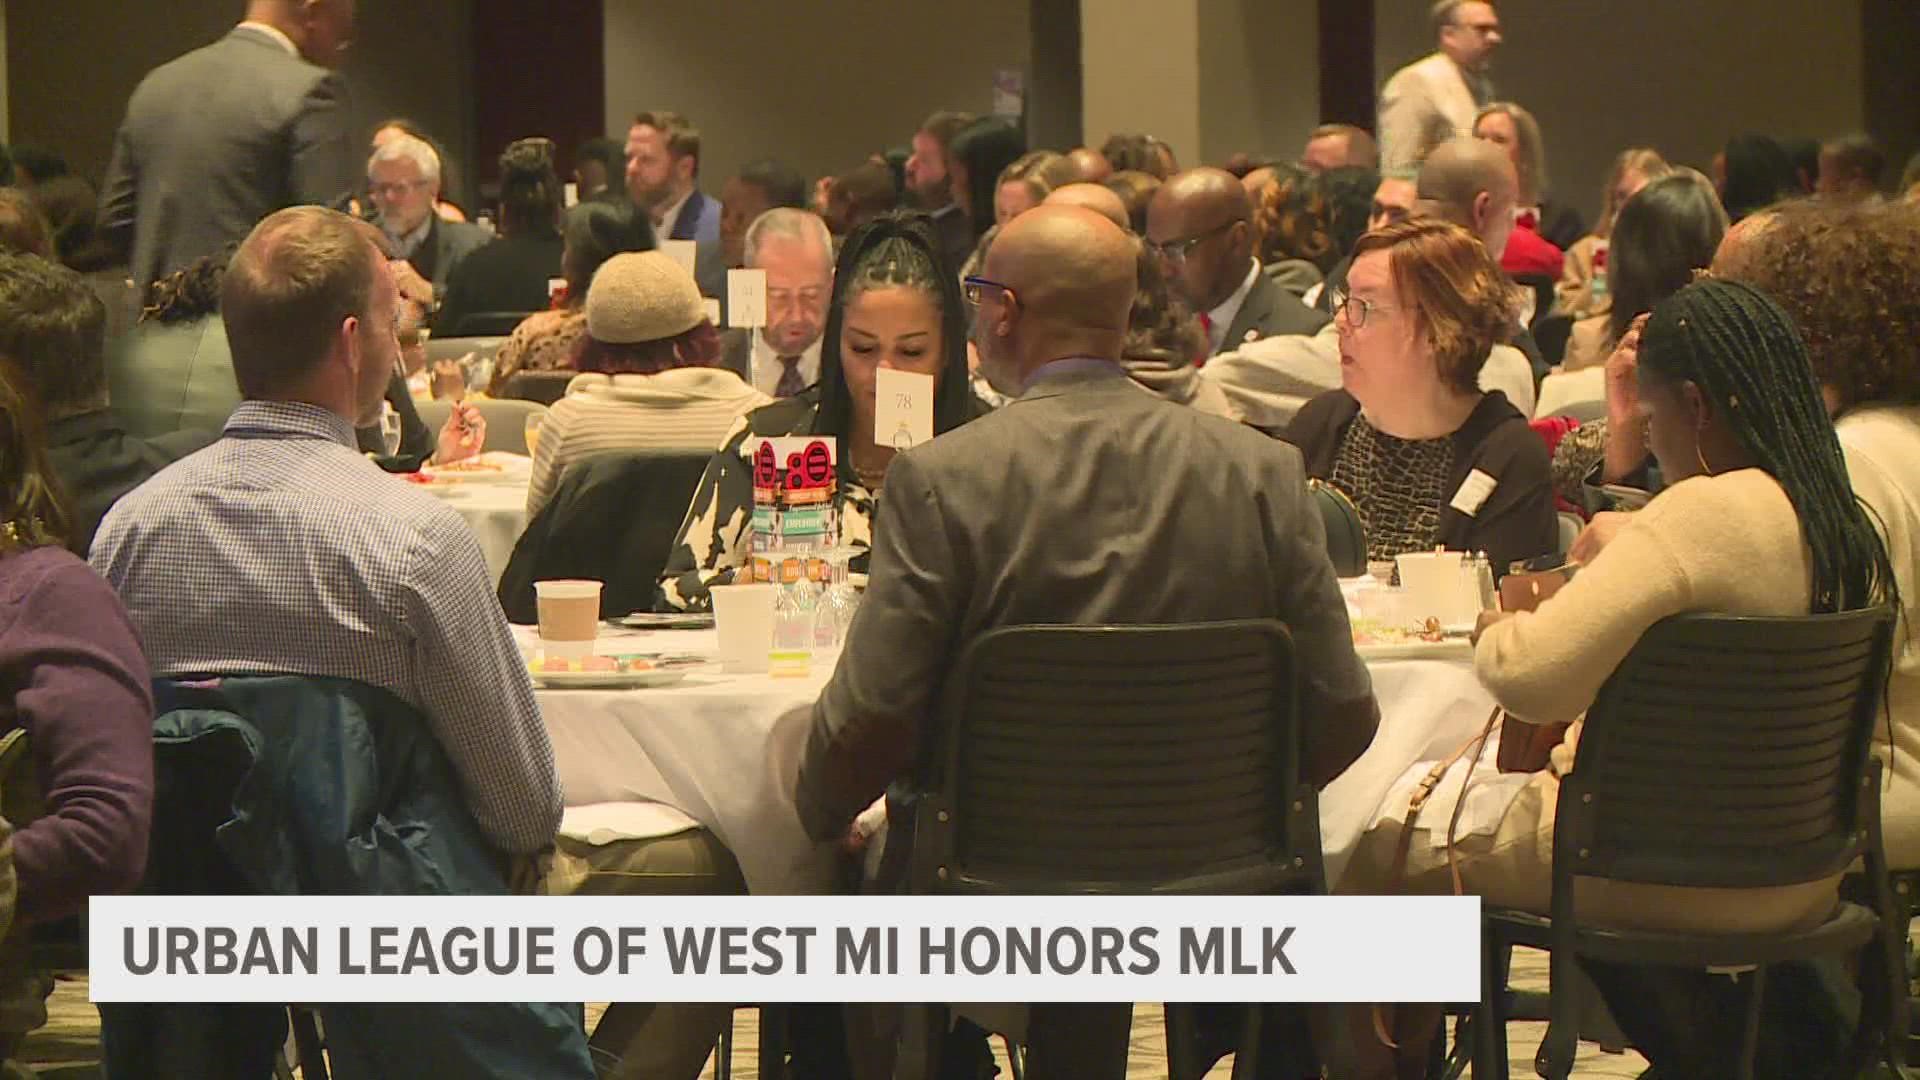 The event honored Dr. King’s impact on the Black community while also celebrating the diversity of the Grand Rapids community.